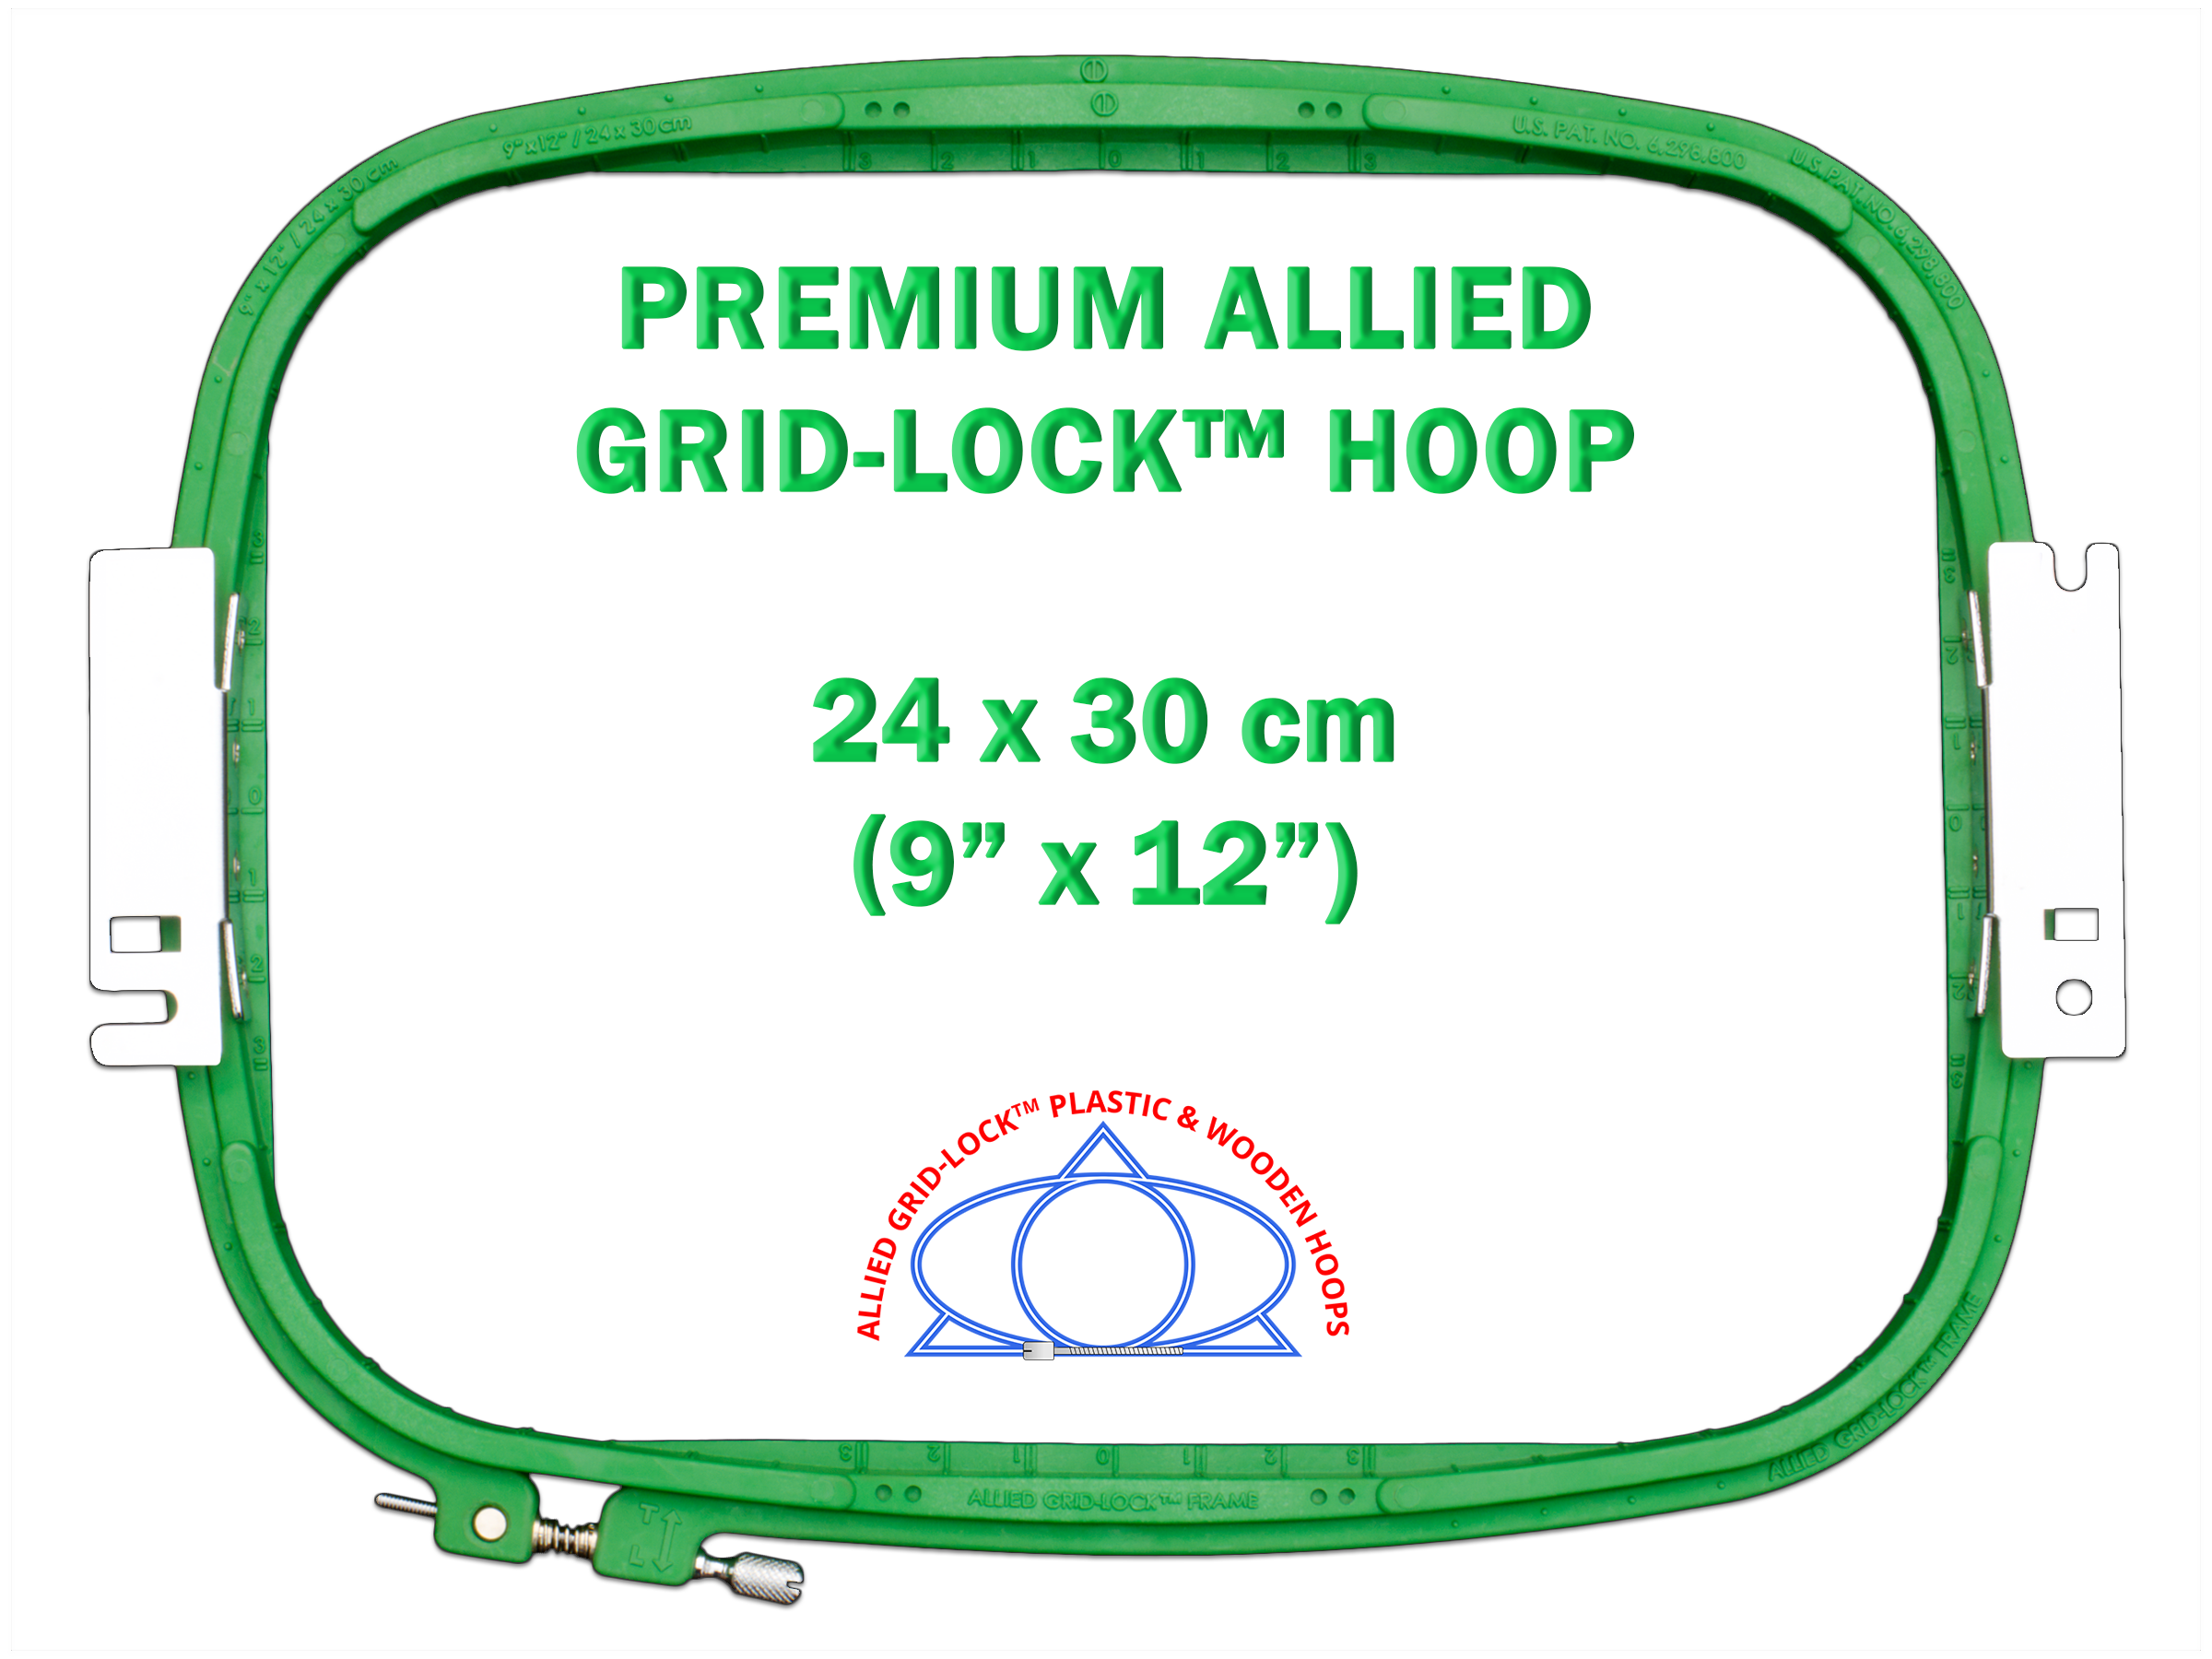 Allied Gridlock Hoop for Avance 9" x 12" Questions & Answers